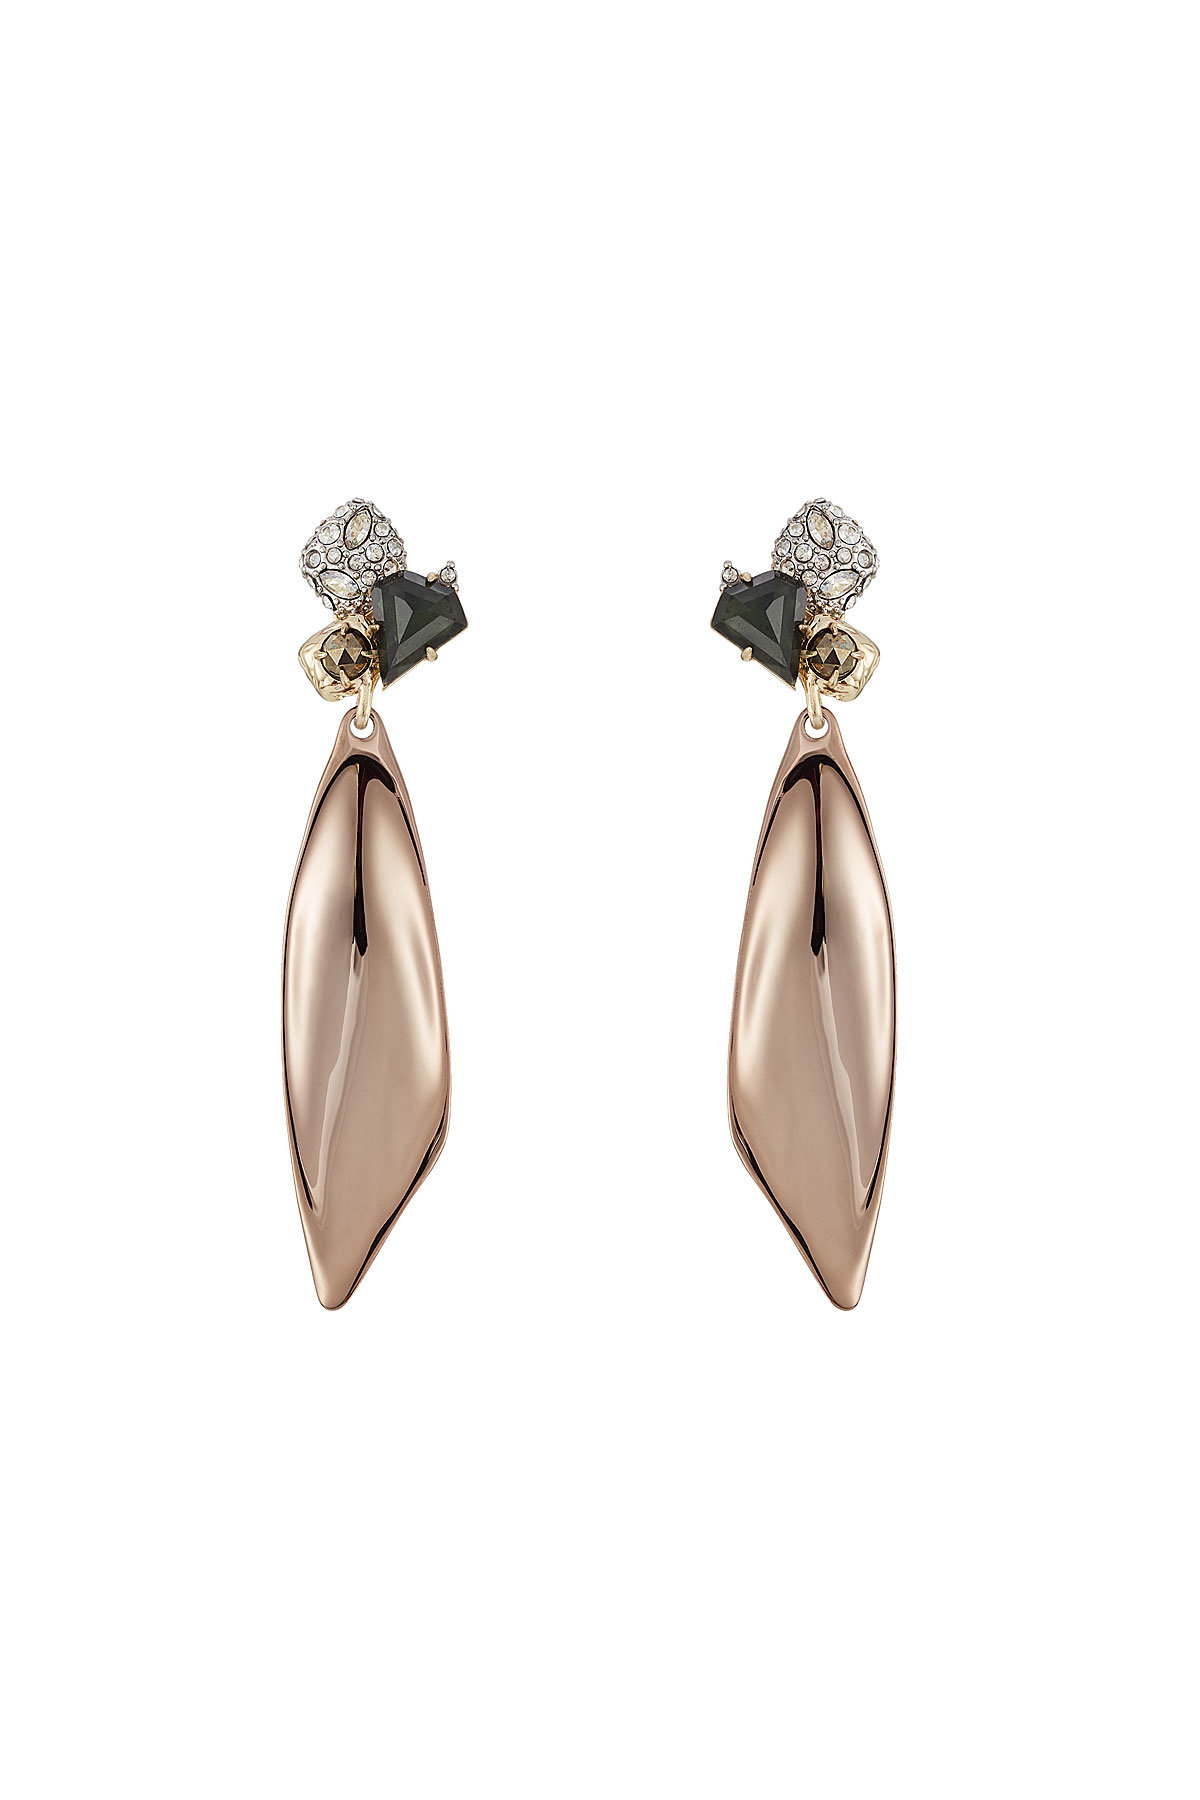 Alexis Bittar - 10kt Gold Earrings with Crystals